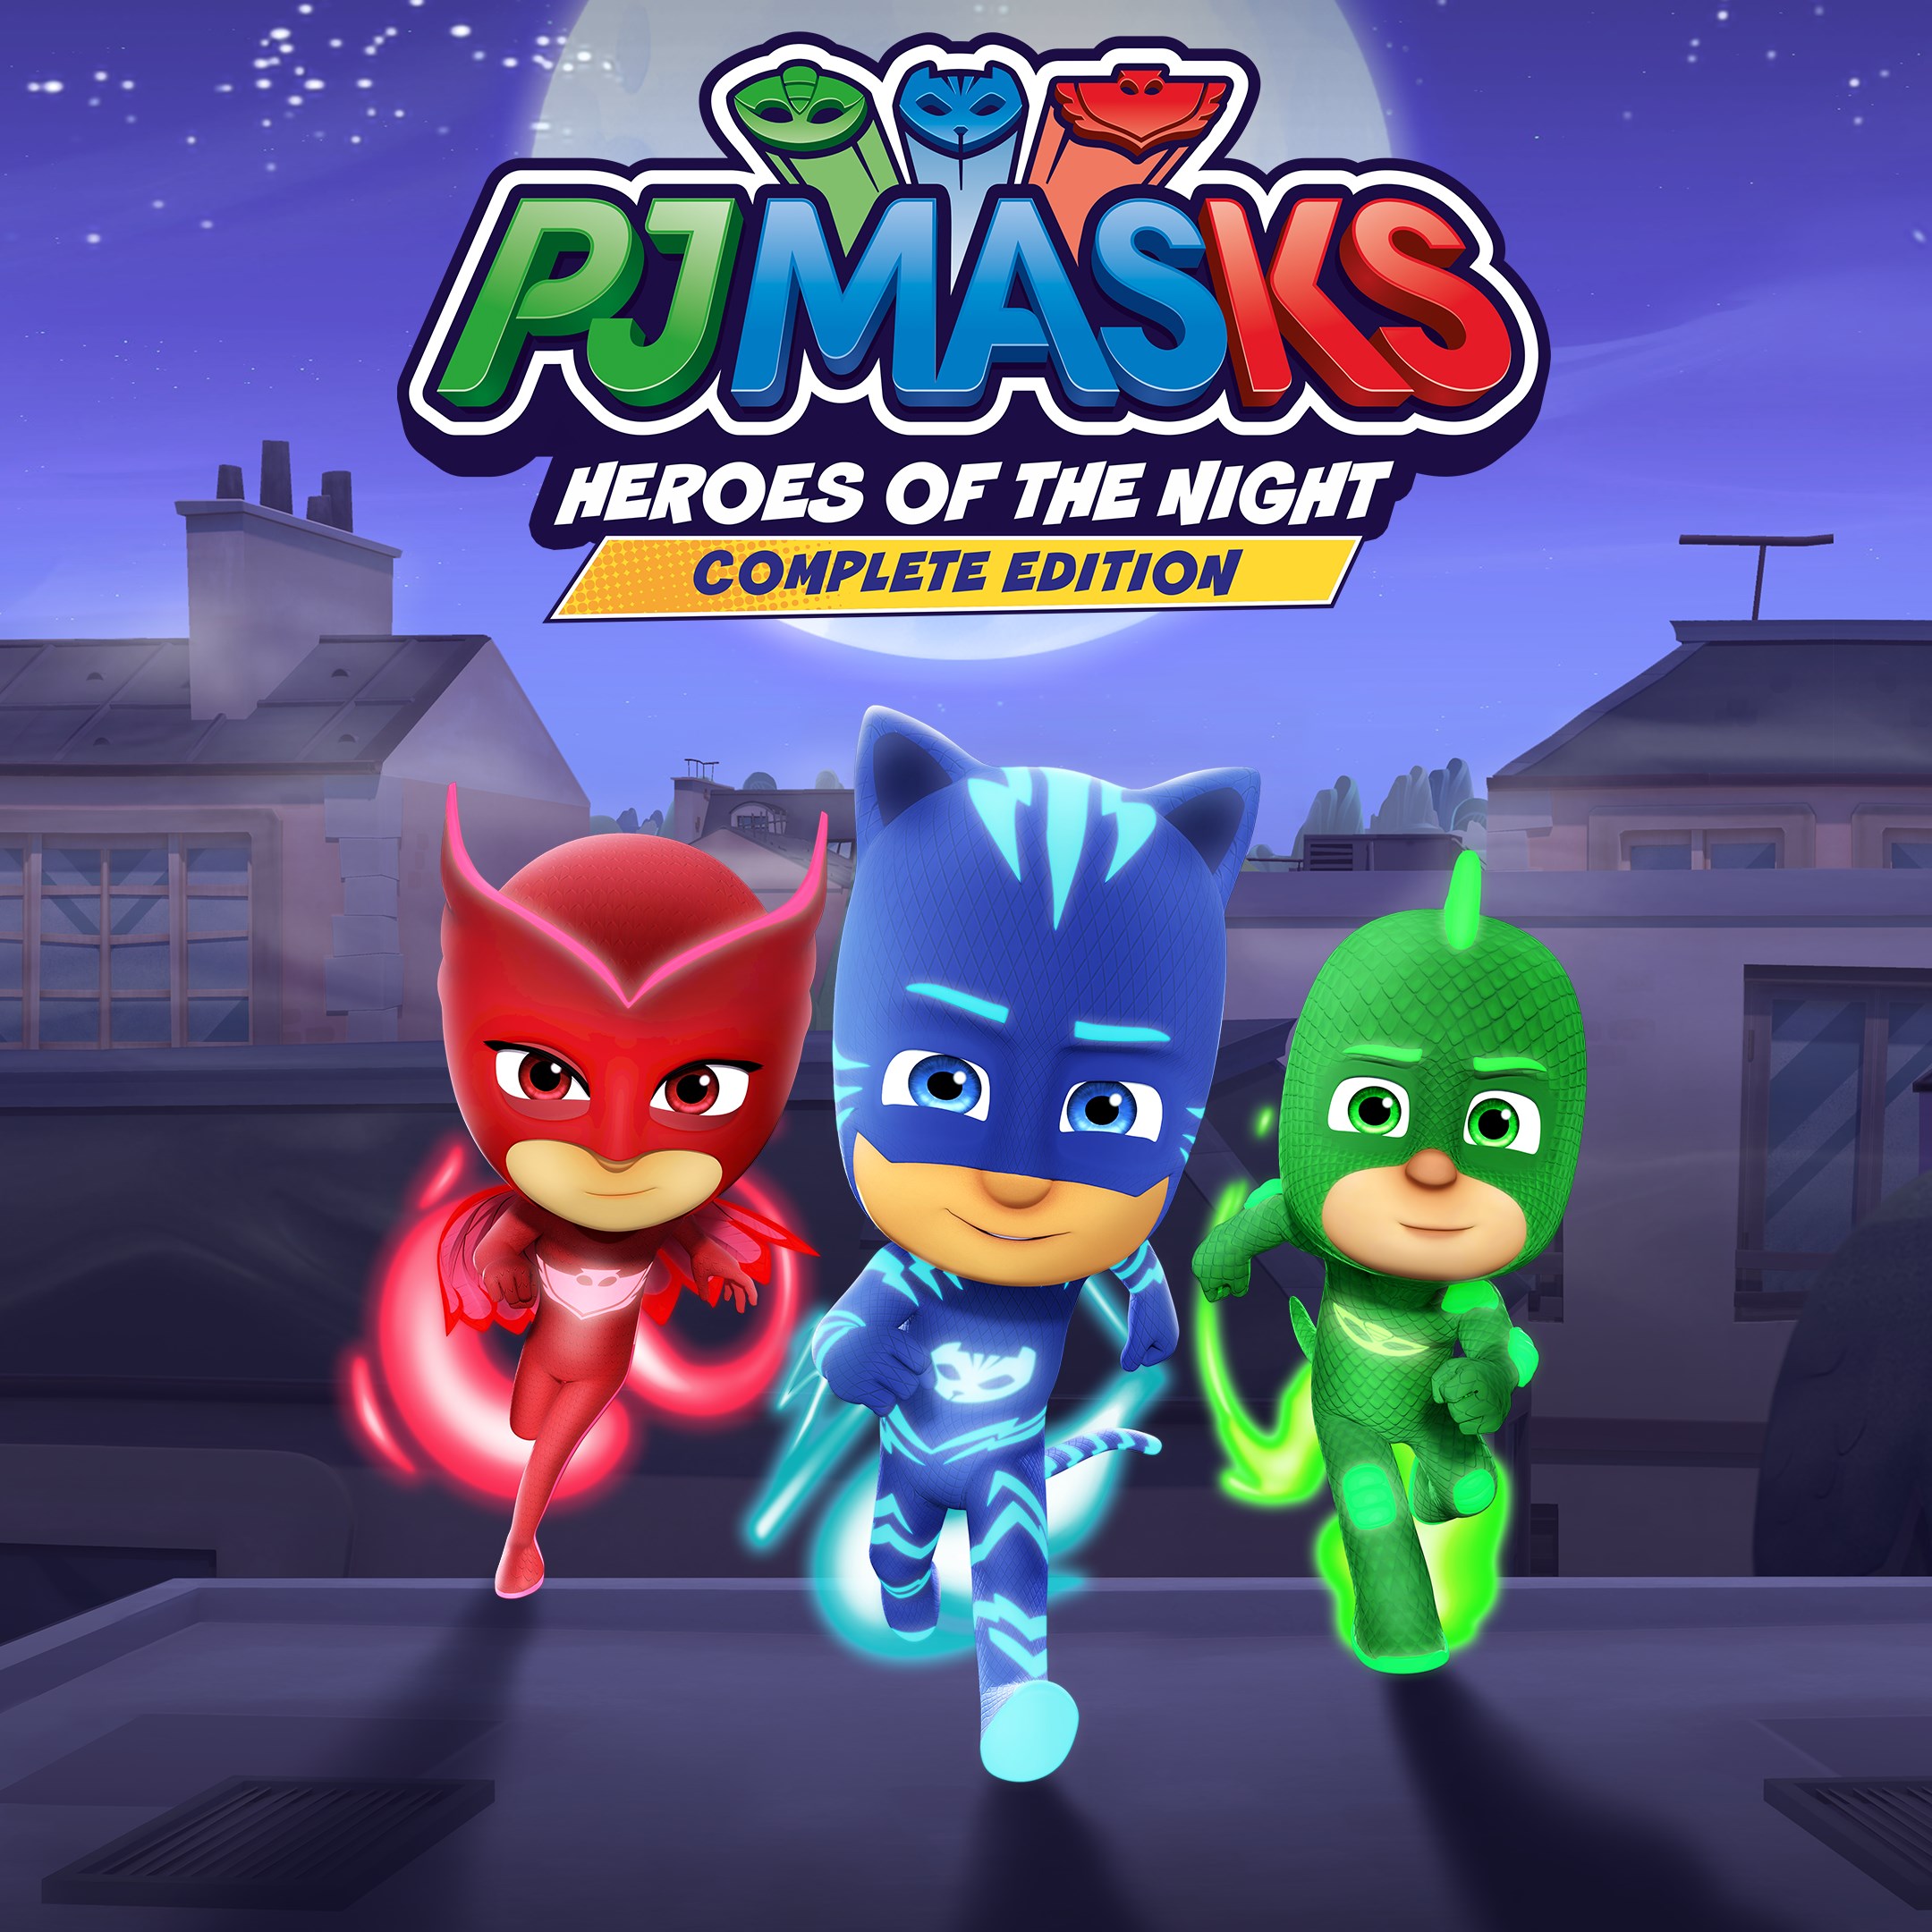 PJ Masks: Heroes of The Night (Xbox) - FULL GAME / ALL COLLECTIBLES **  Achievement / Trophy Guide** 